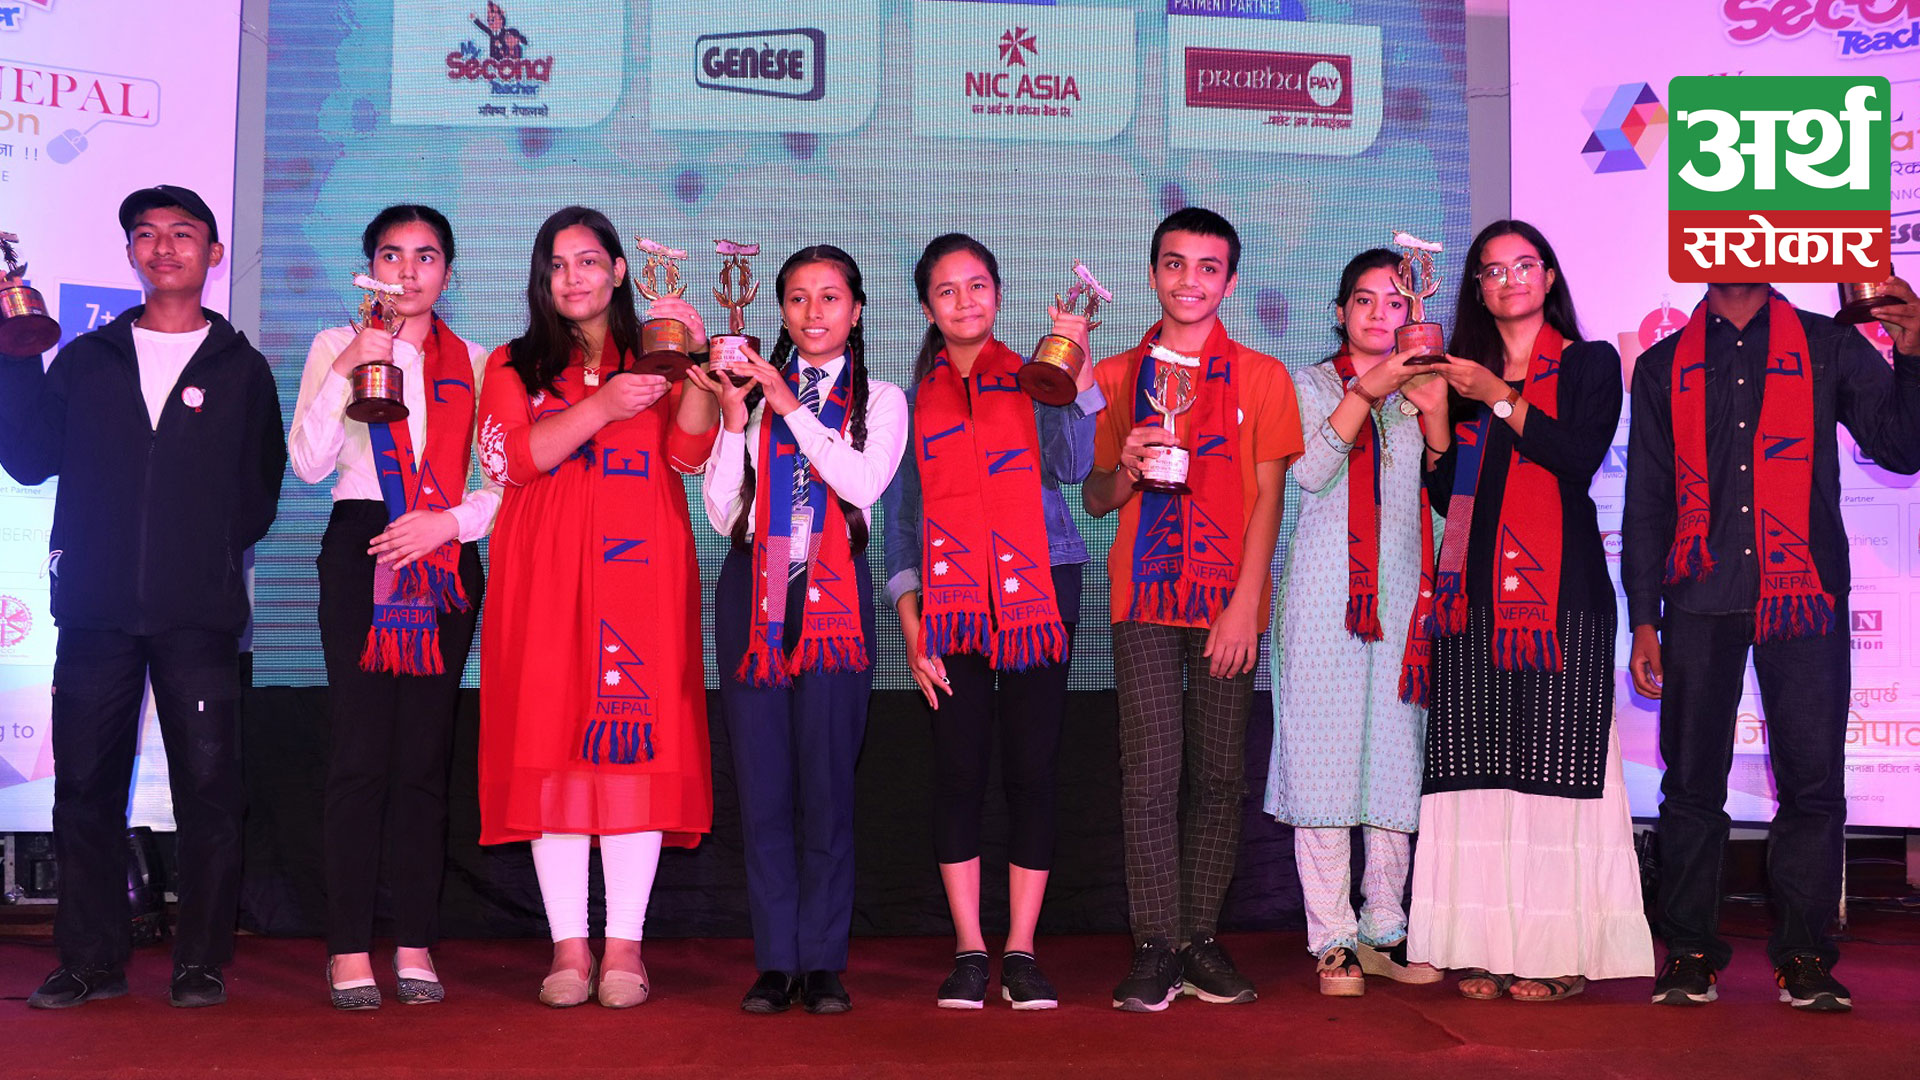 Winners of ‘My Digital Nepal, My Vision’ competition announced, 8 winners received 3 lakhs 51 thousand amount of prize